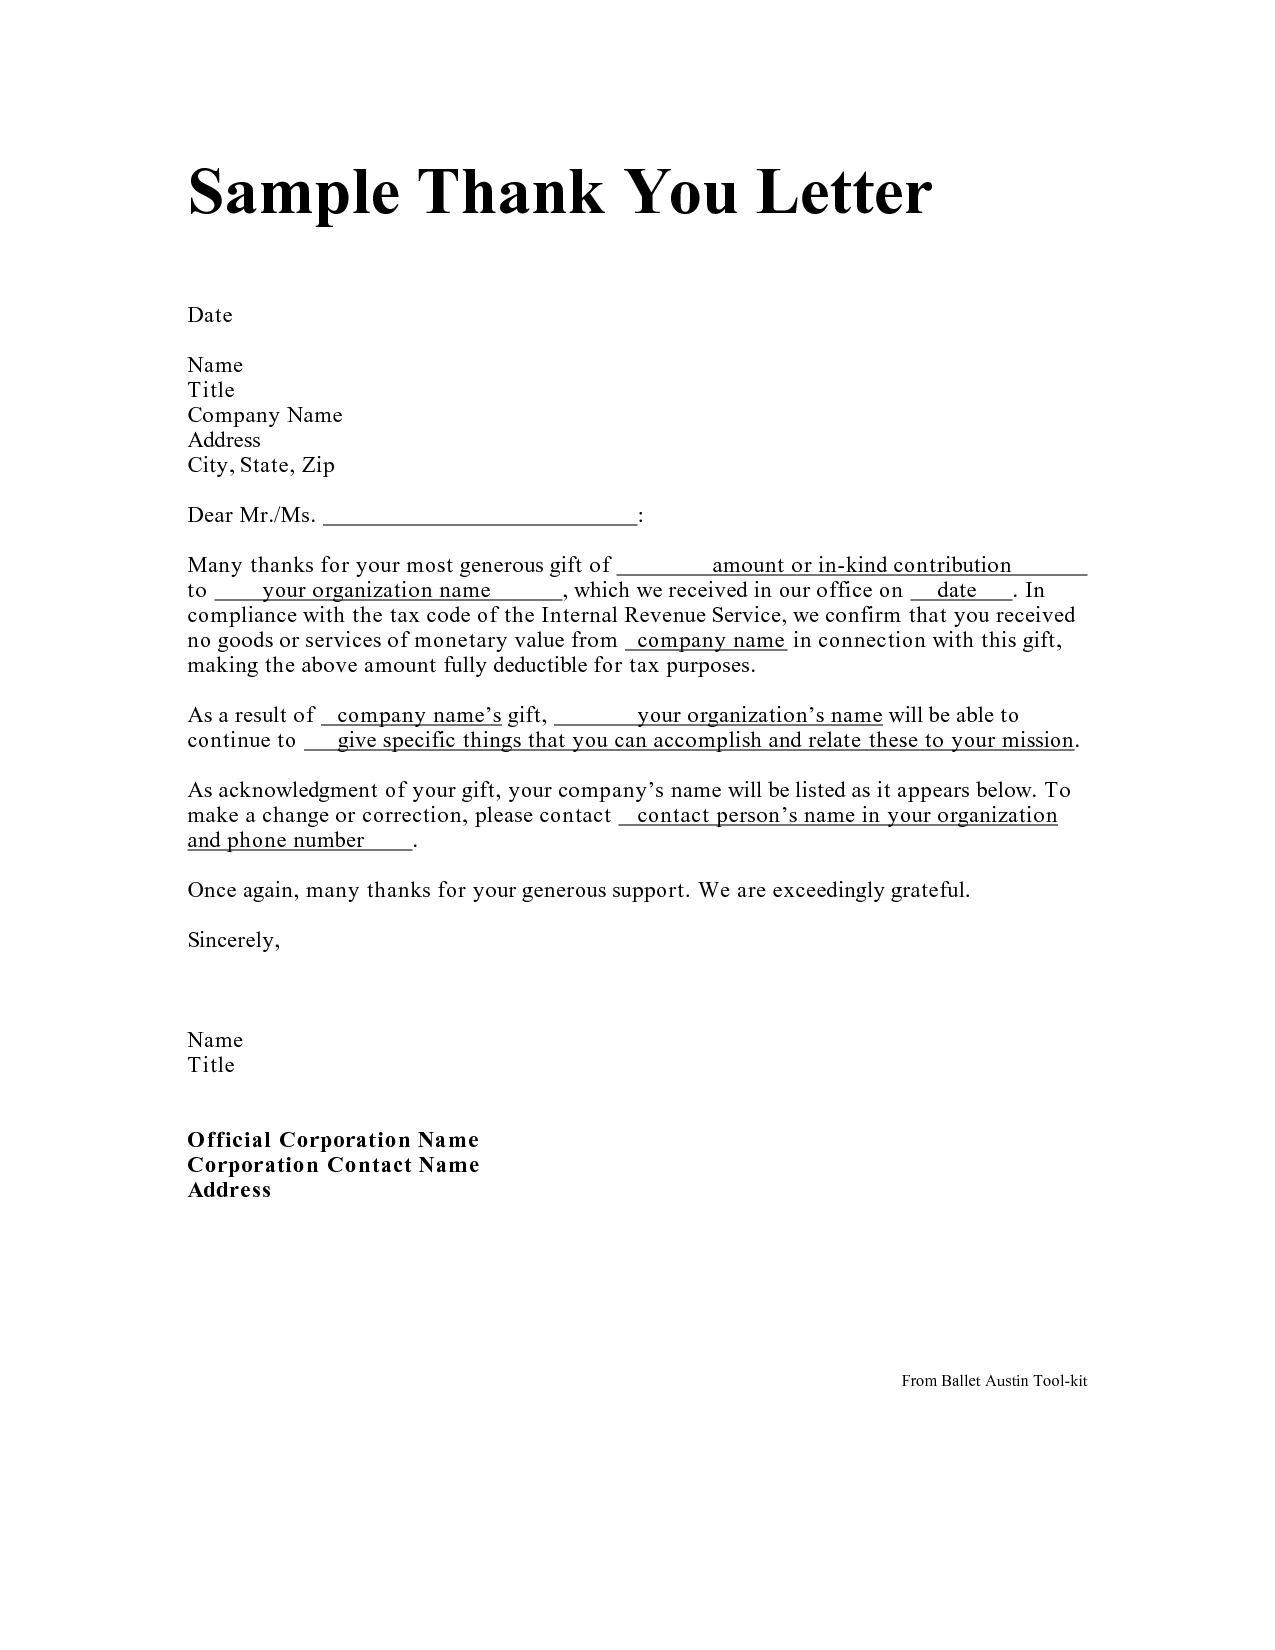 Mission Letter Template - Personal Thank You Letter Personal Thank You Letter Samples